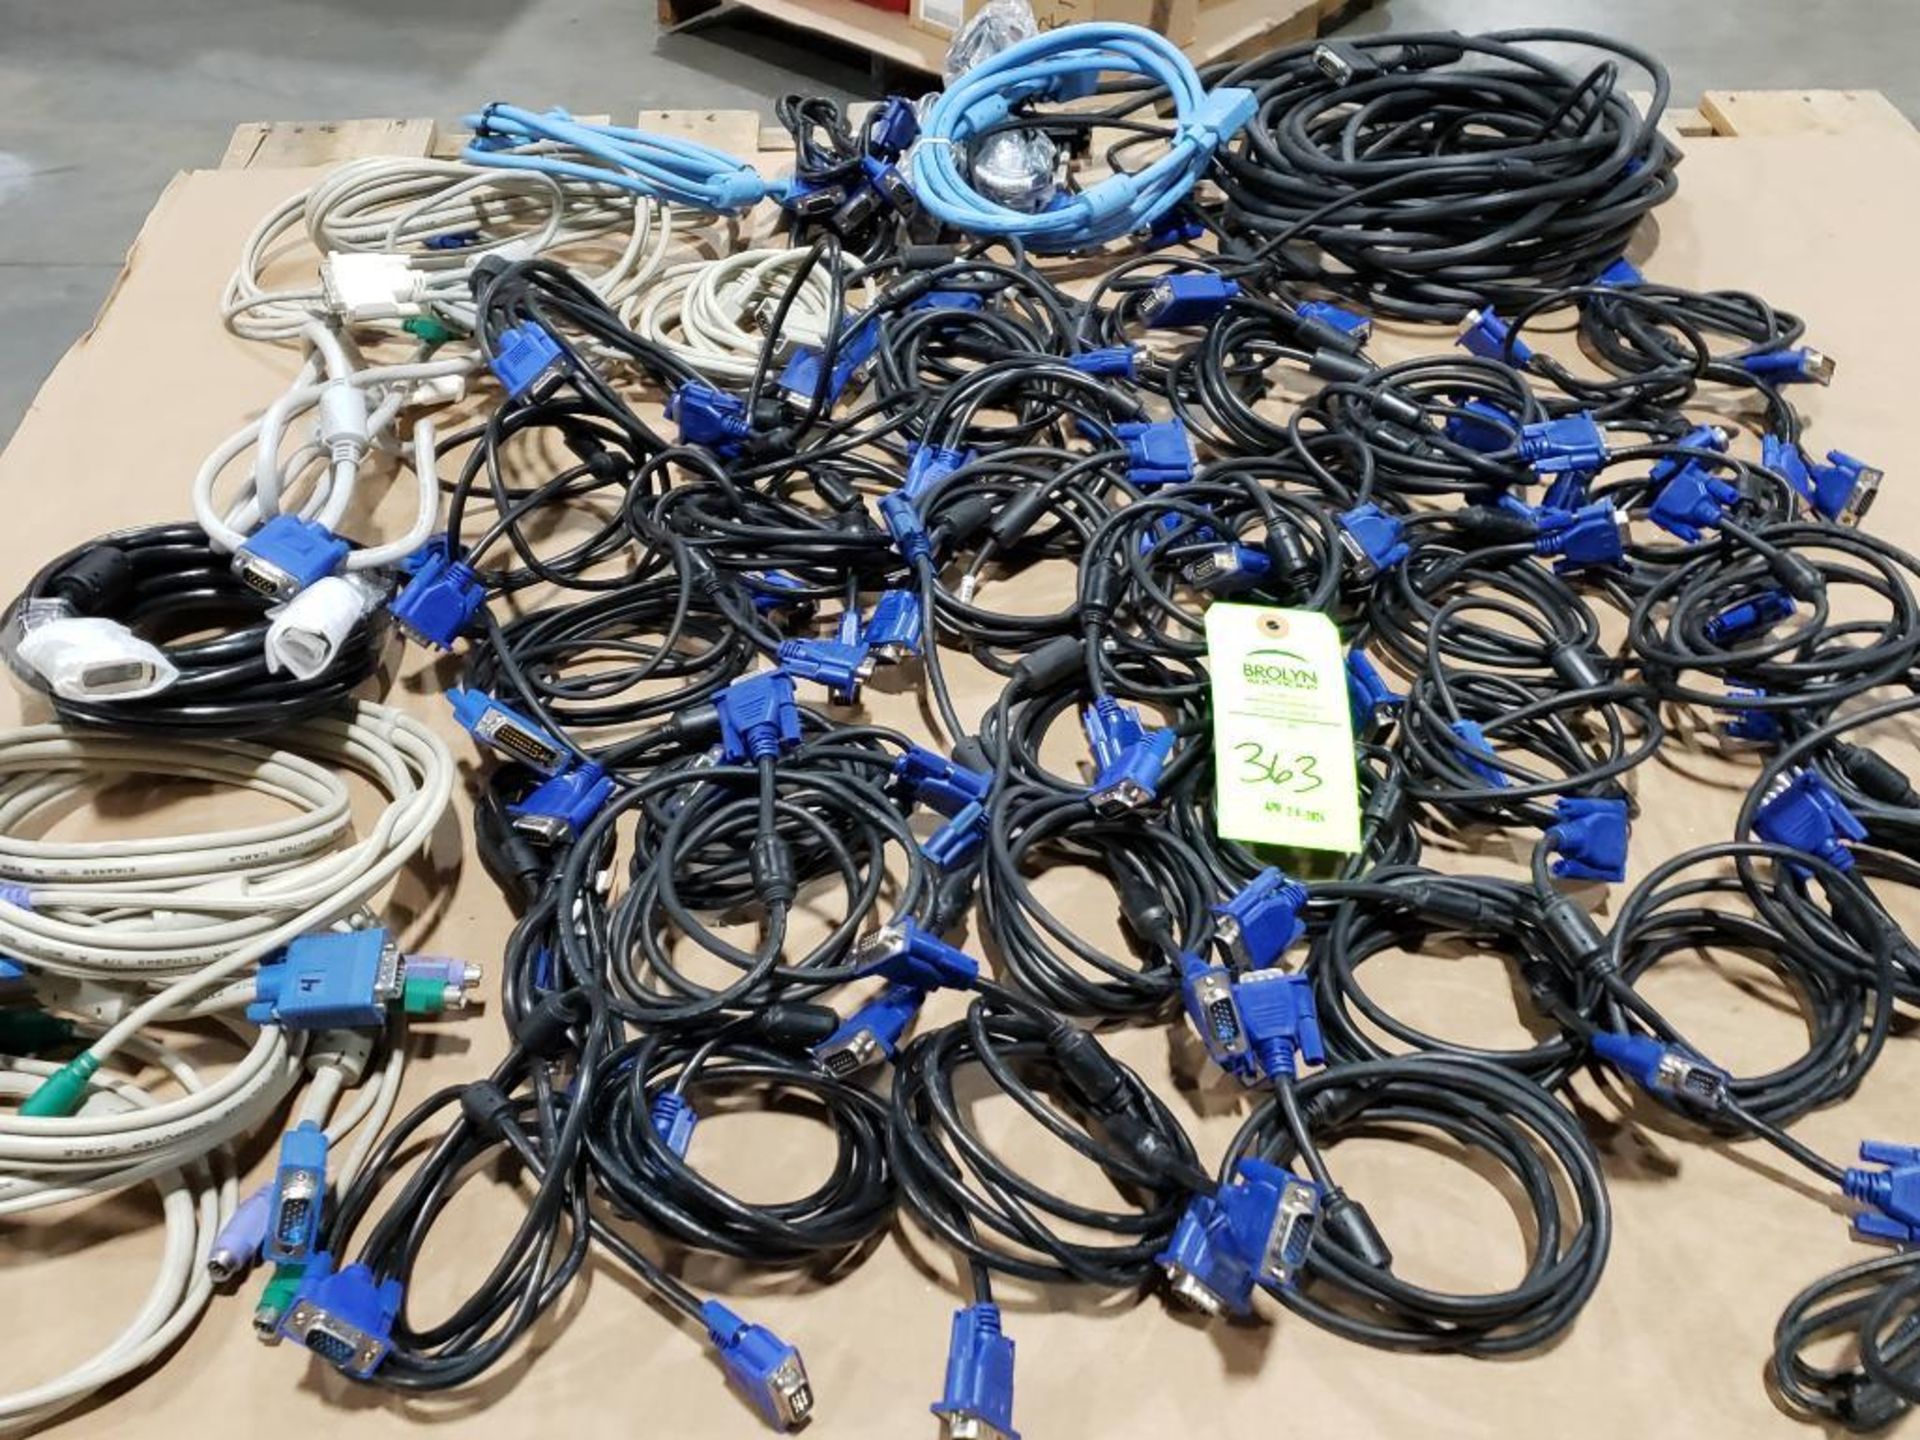 Large assortment of monitor cords. - Image 10 of 10